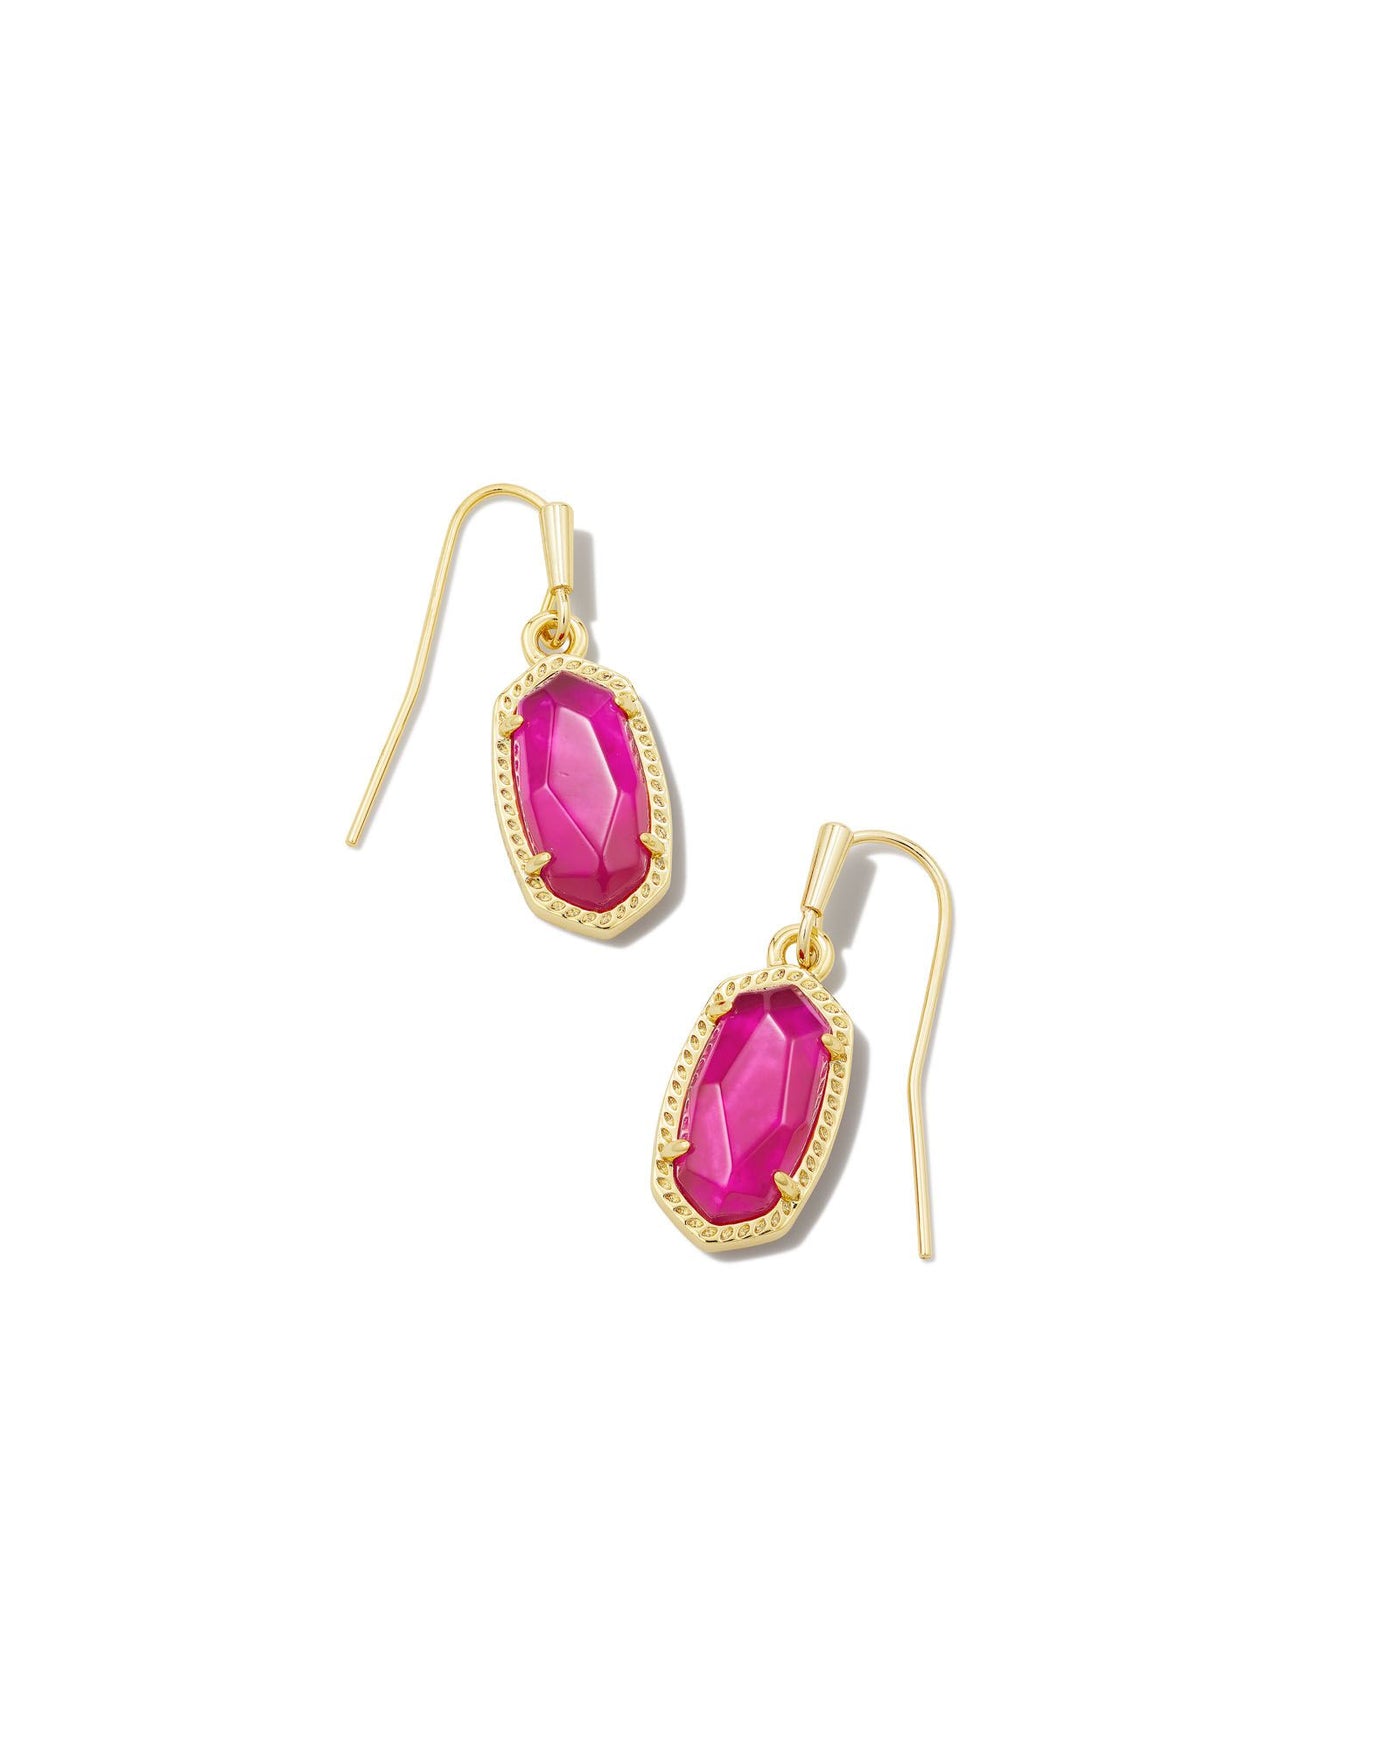 Kendra Scott Lee Gold Drop Earrings In Azalea Illusion-Earrings-Kendra Scott-Market Street Nest, Fashionable Clothing, Shoes and Home Décor Located in Mabank, TX